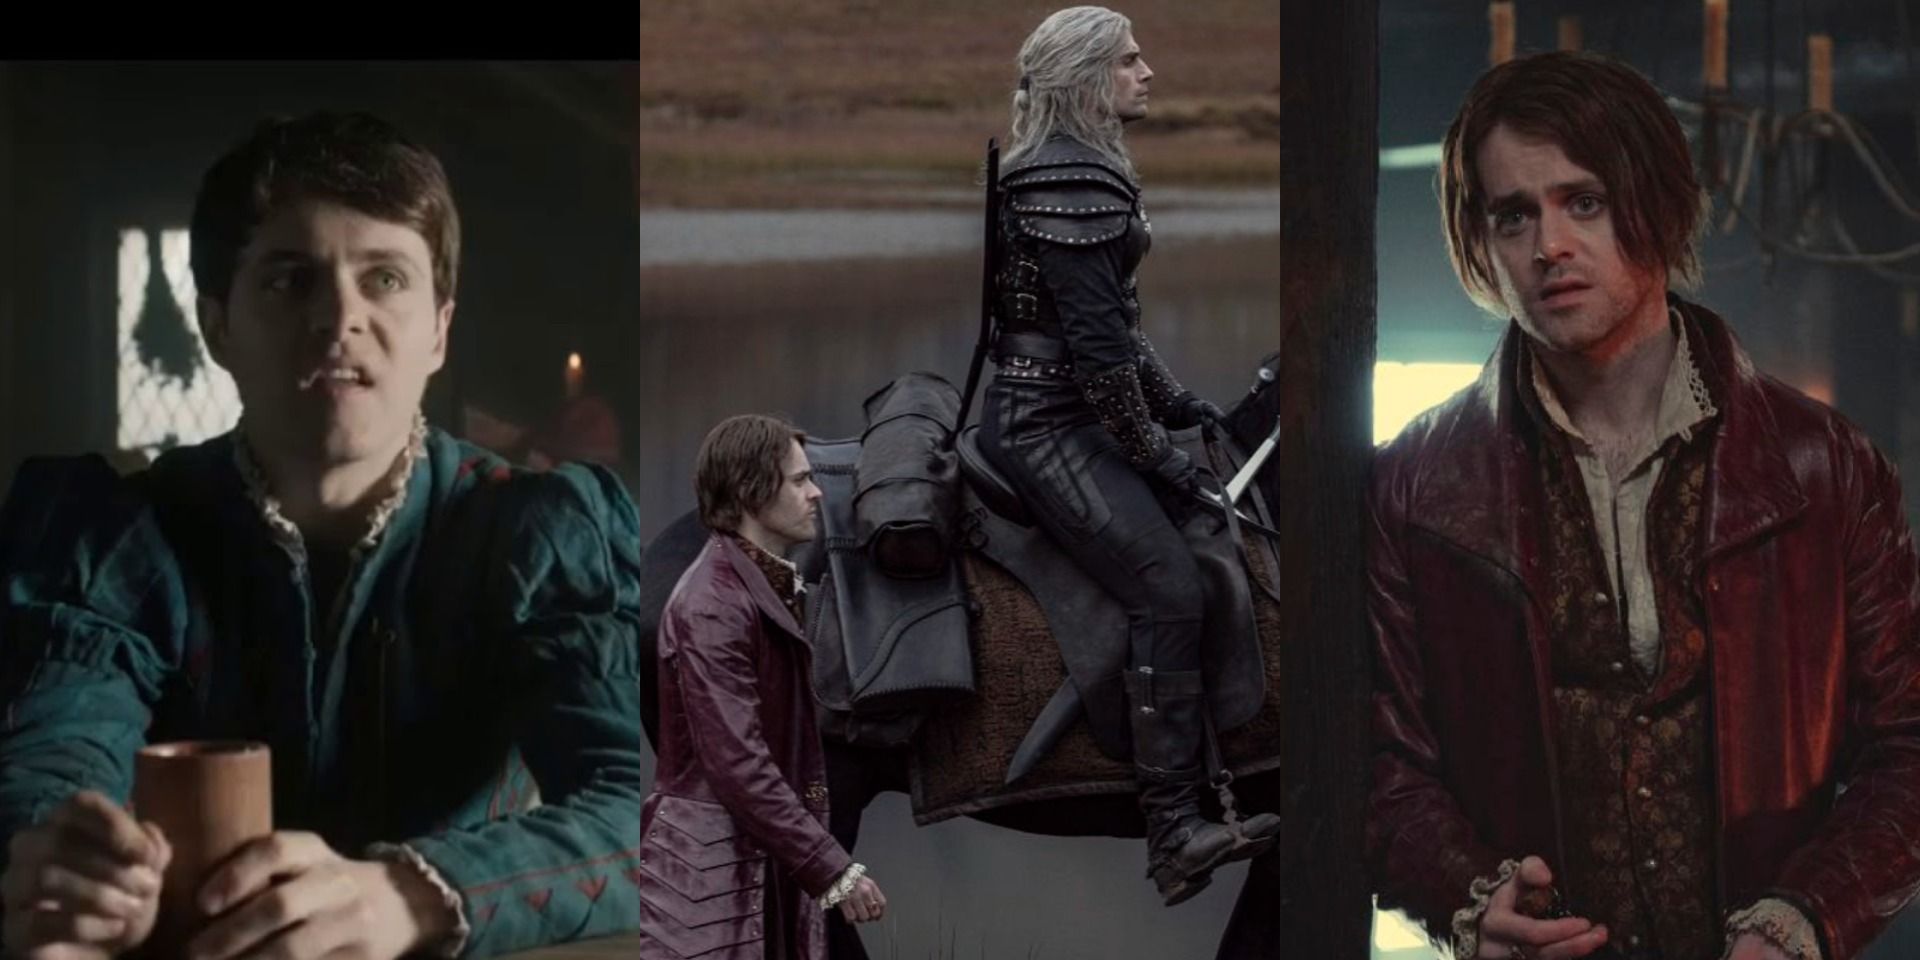 Three scenes featuring Jaskier from The Witcher.